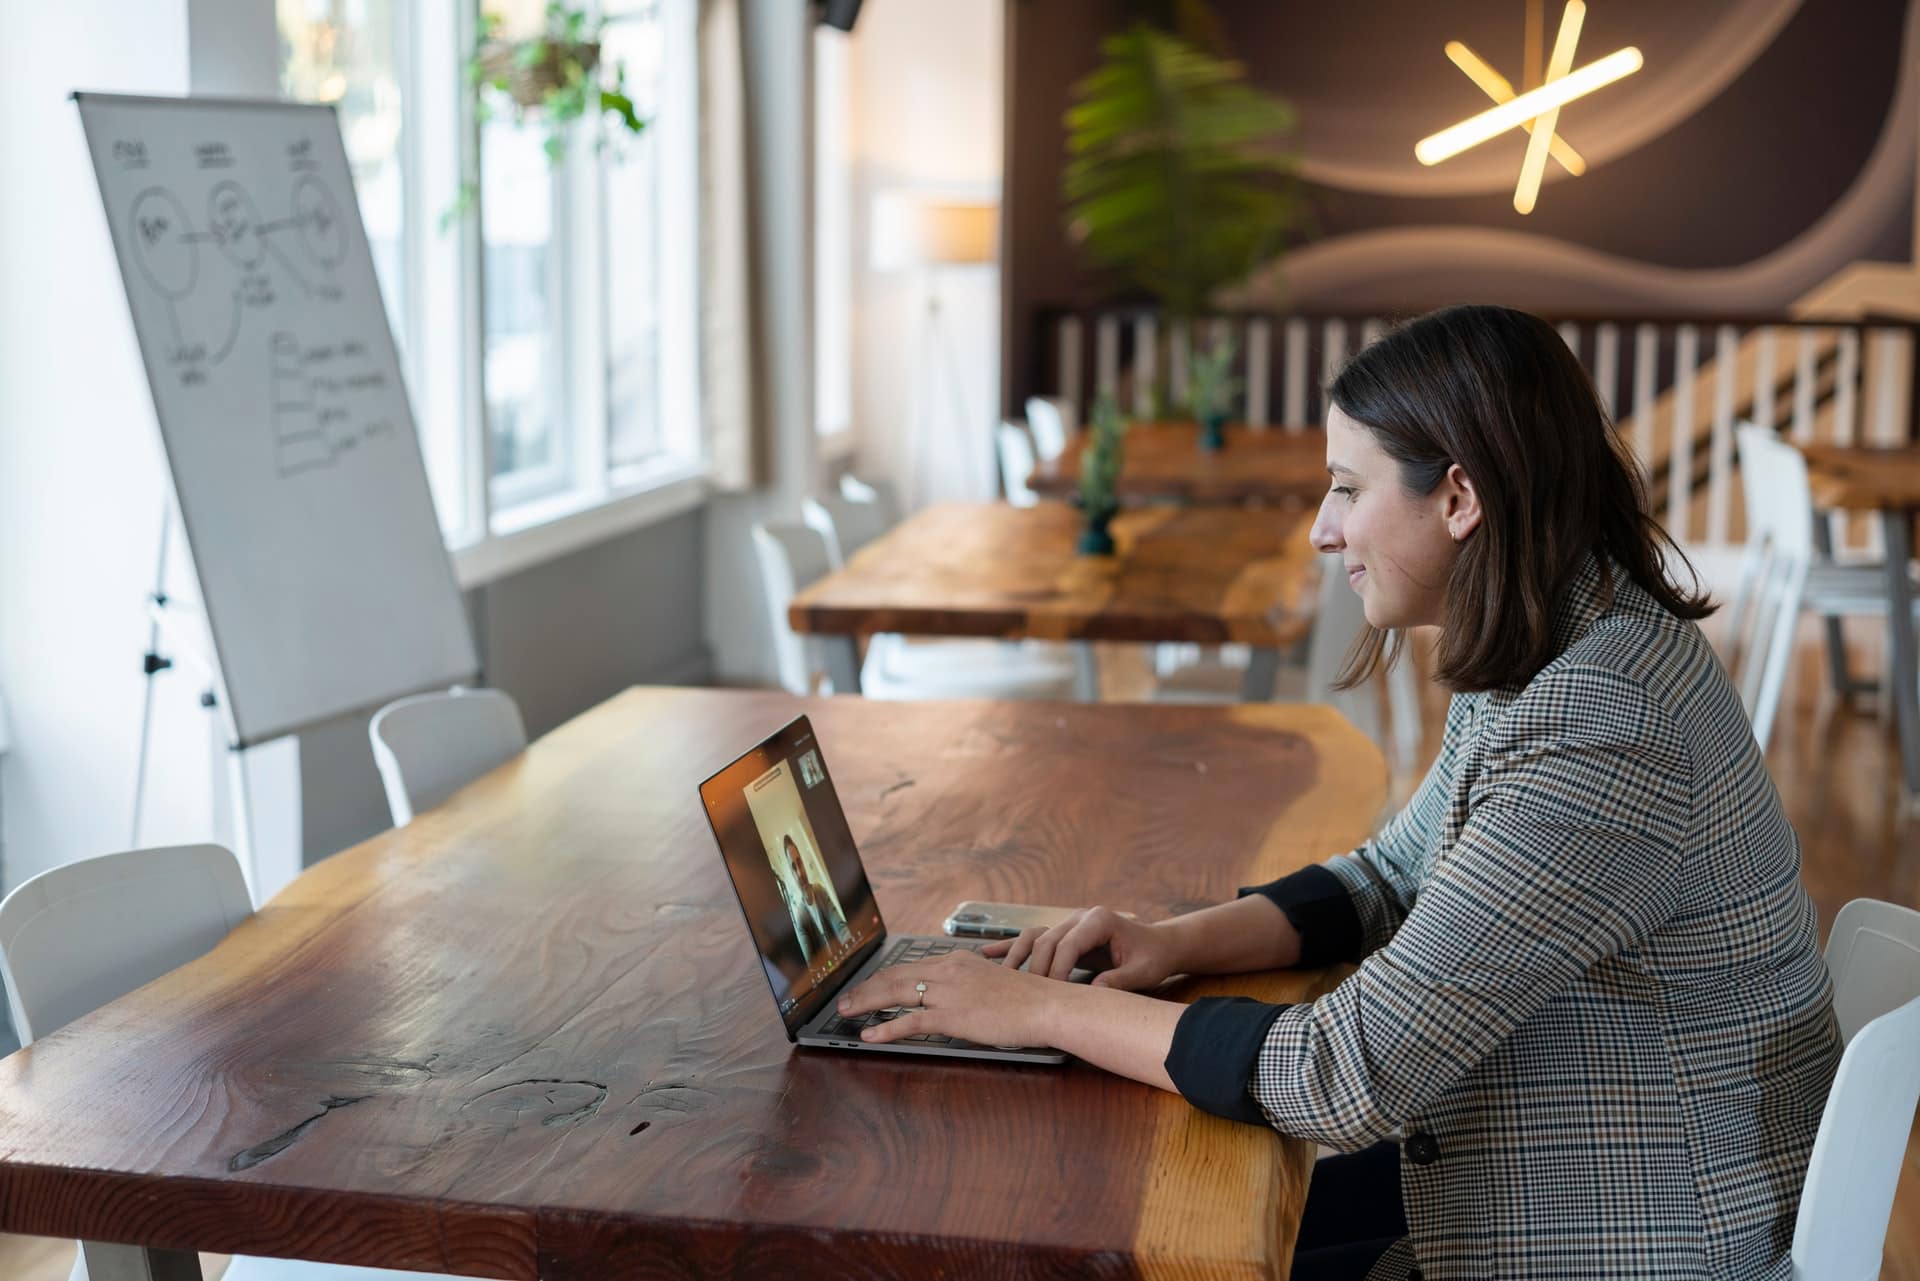 5 Simple Approaches to Assess Talent While Hiring Remotely